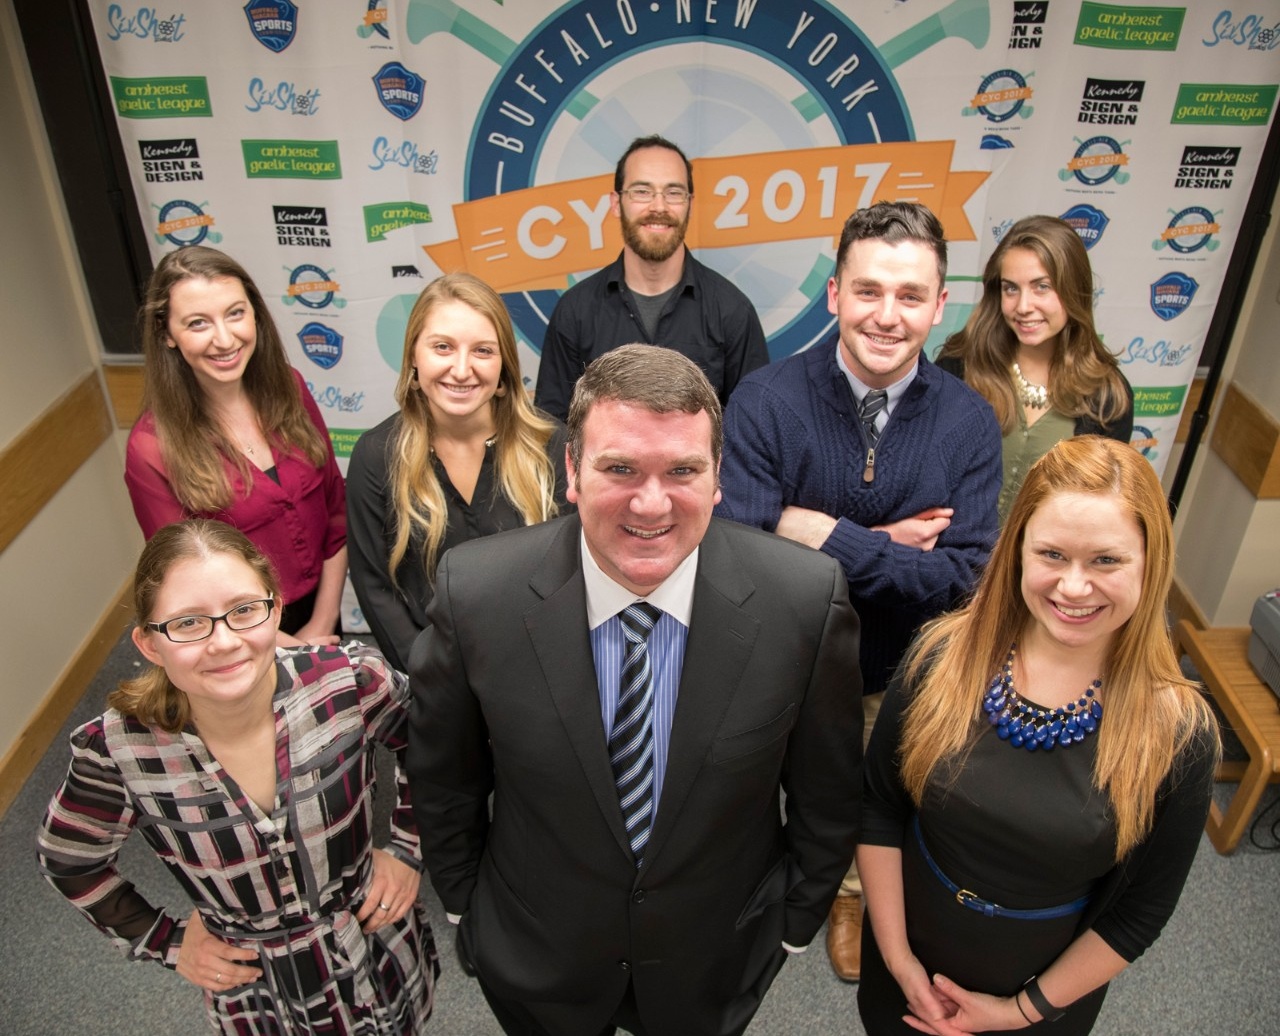 Zoom image: Management interns lead marketing and sponsorship for the CYC. Back row, from left: Elyssa Mountain, BS ’18; Lauren Gates-Sandburg, BS ’18; James Omps, volunteer; Alec LaCorazza, BS ’17; Daryl Rosh, BS ’18. Front row: Jenah Hernek, BS ’17; Padraic Walsh, organizing committee chair; Megan Corcoran, BS ’09, PMBA ’18, intern coordinator. Photo: Tom Wolf 